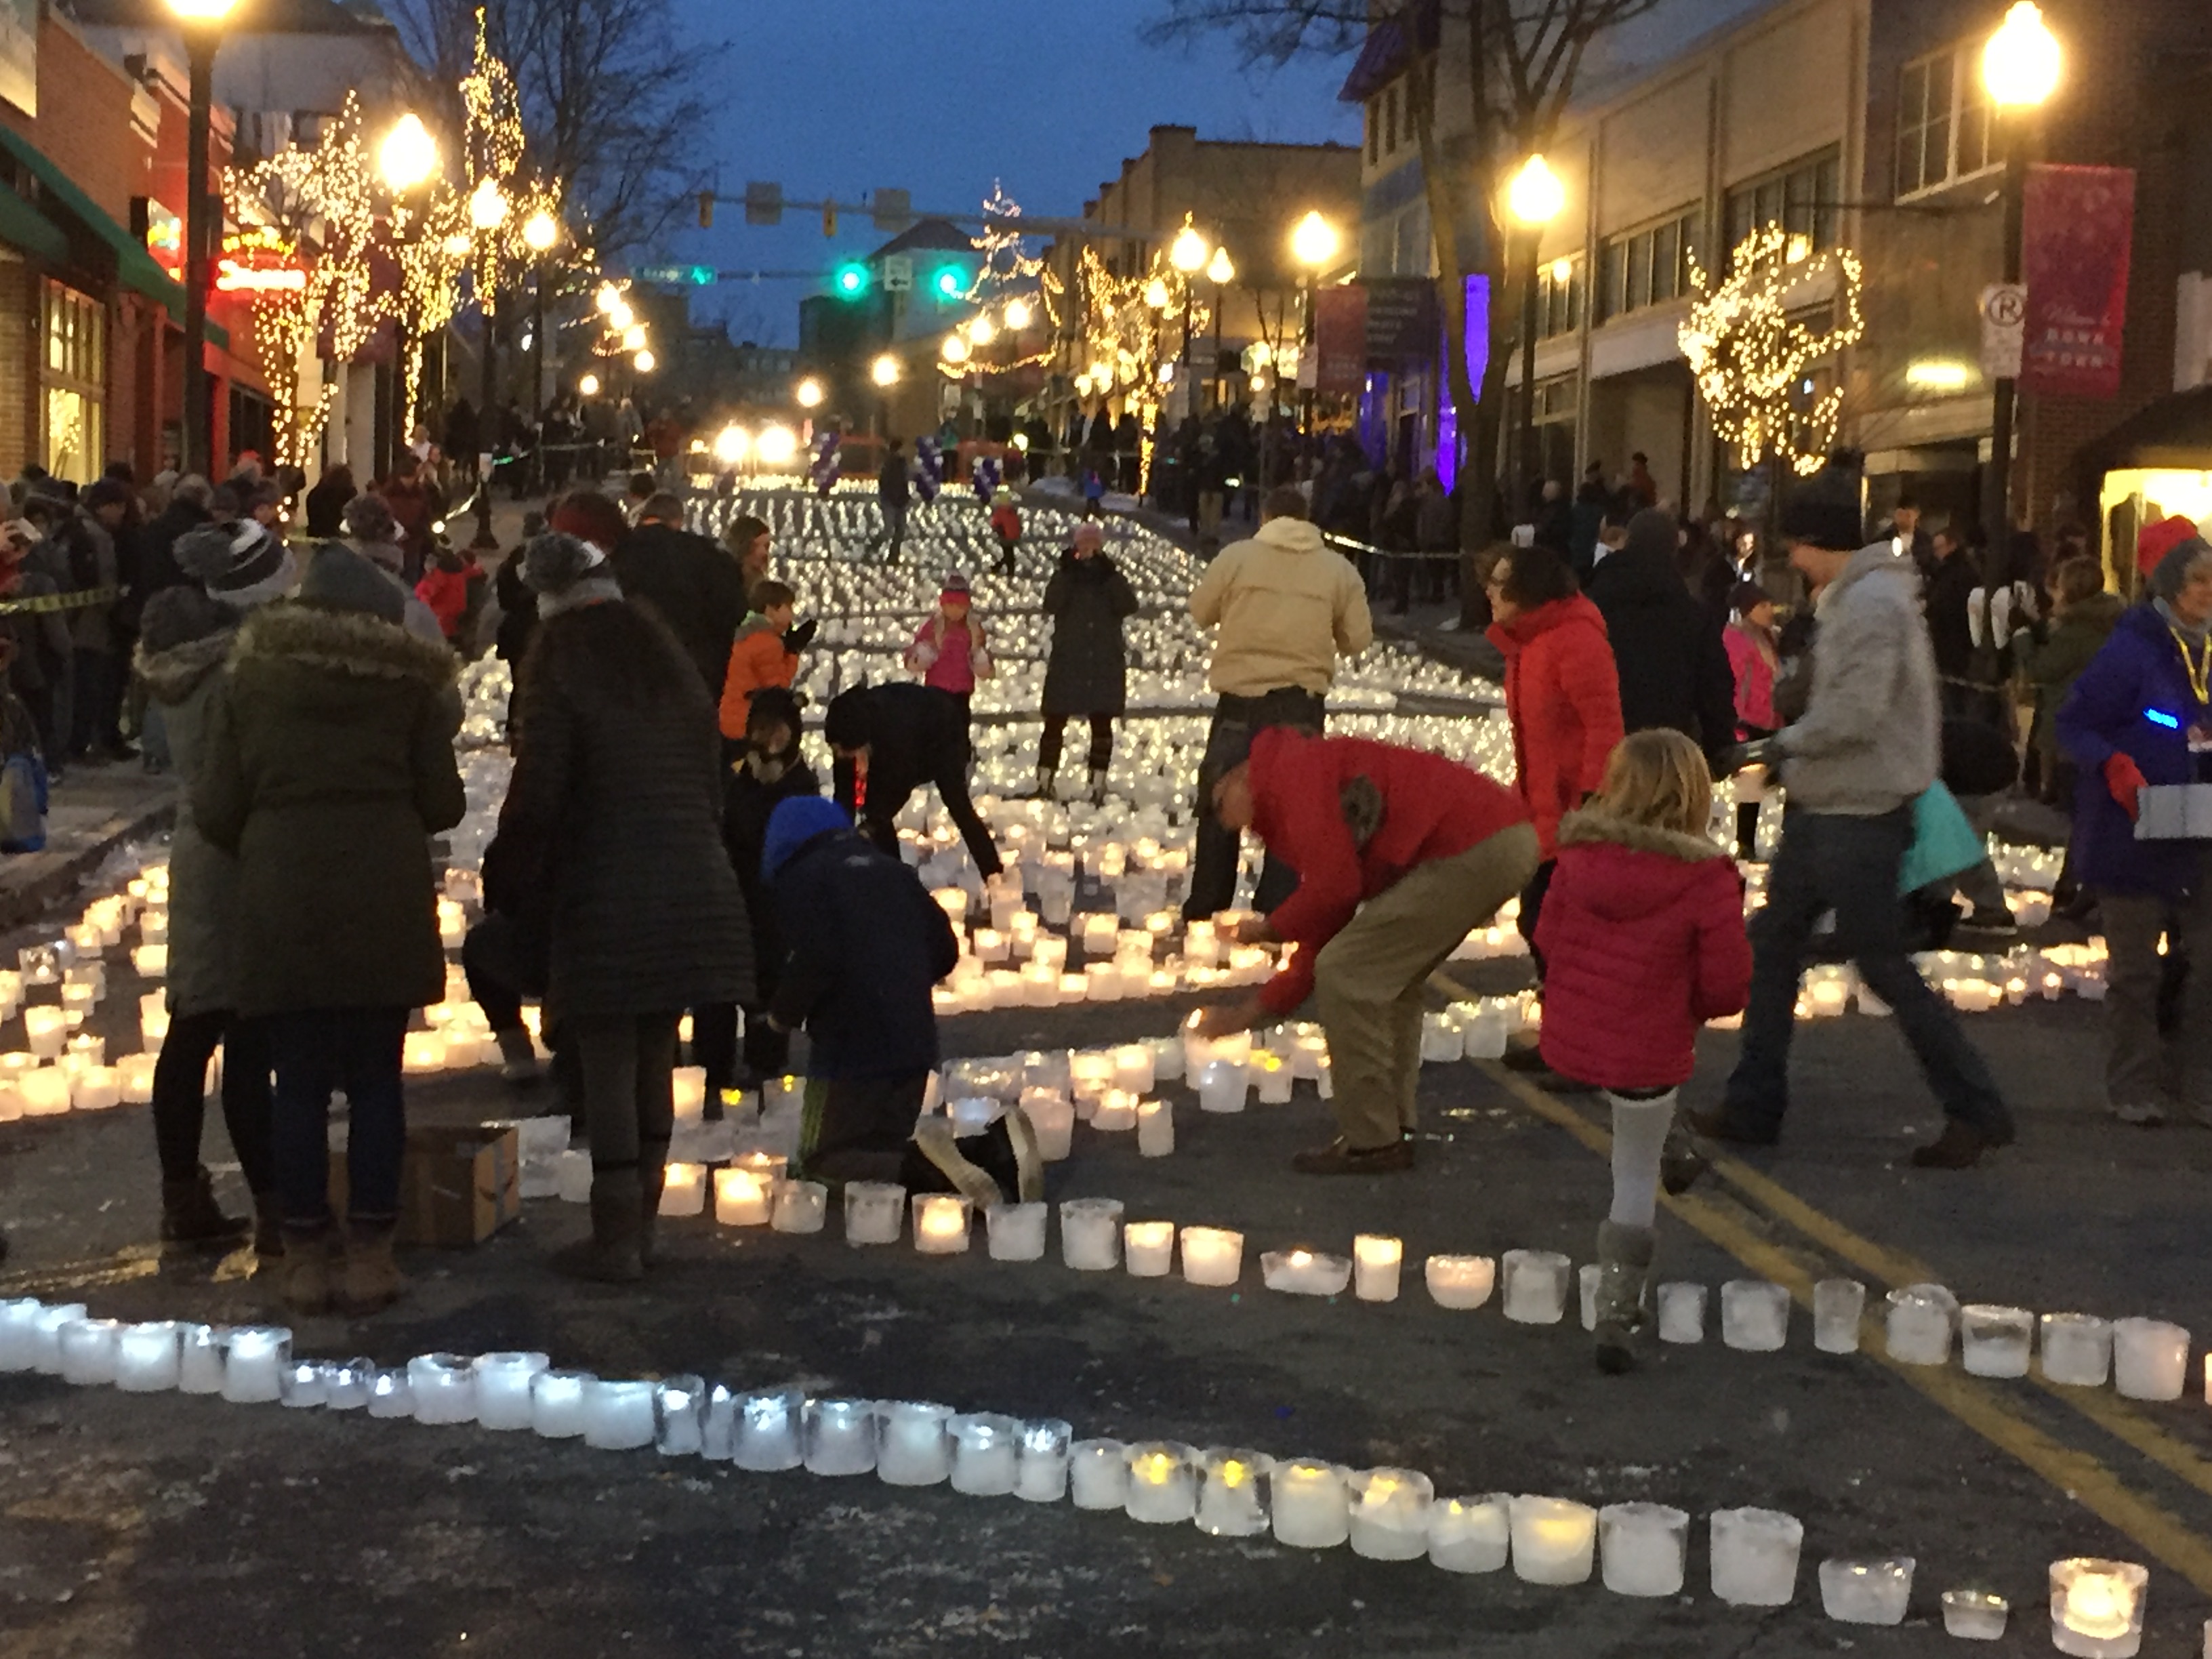 Amazing display of 5,622 ice luminaries on Allen Street in Downtown State College